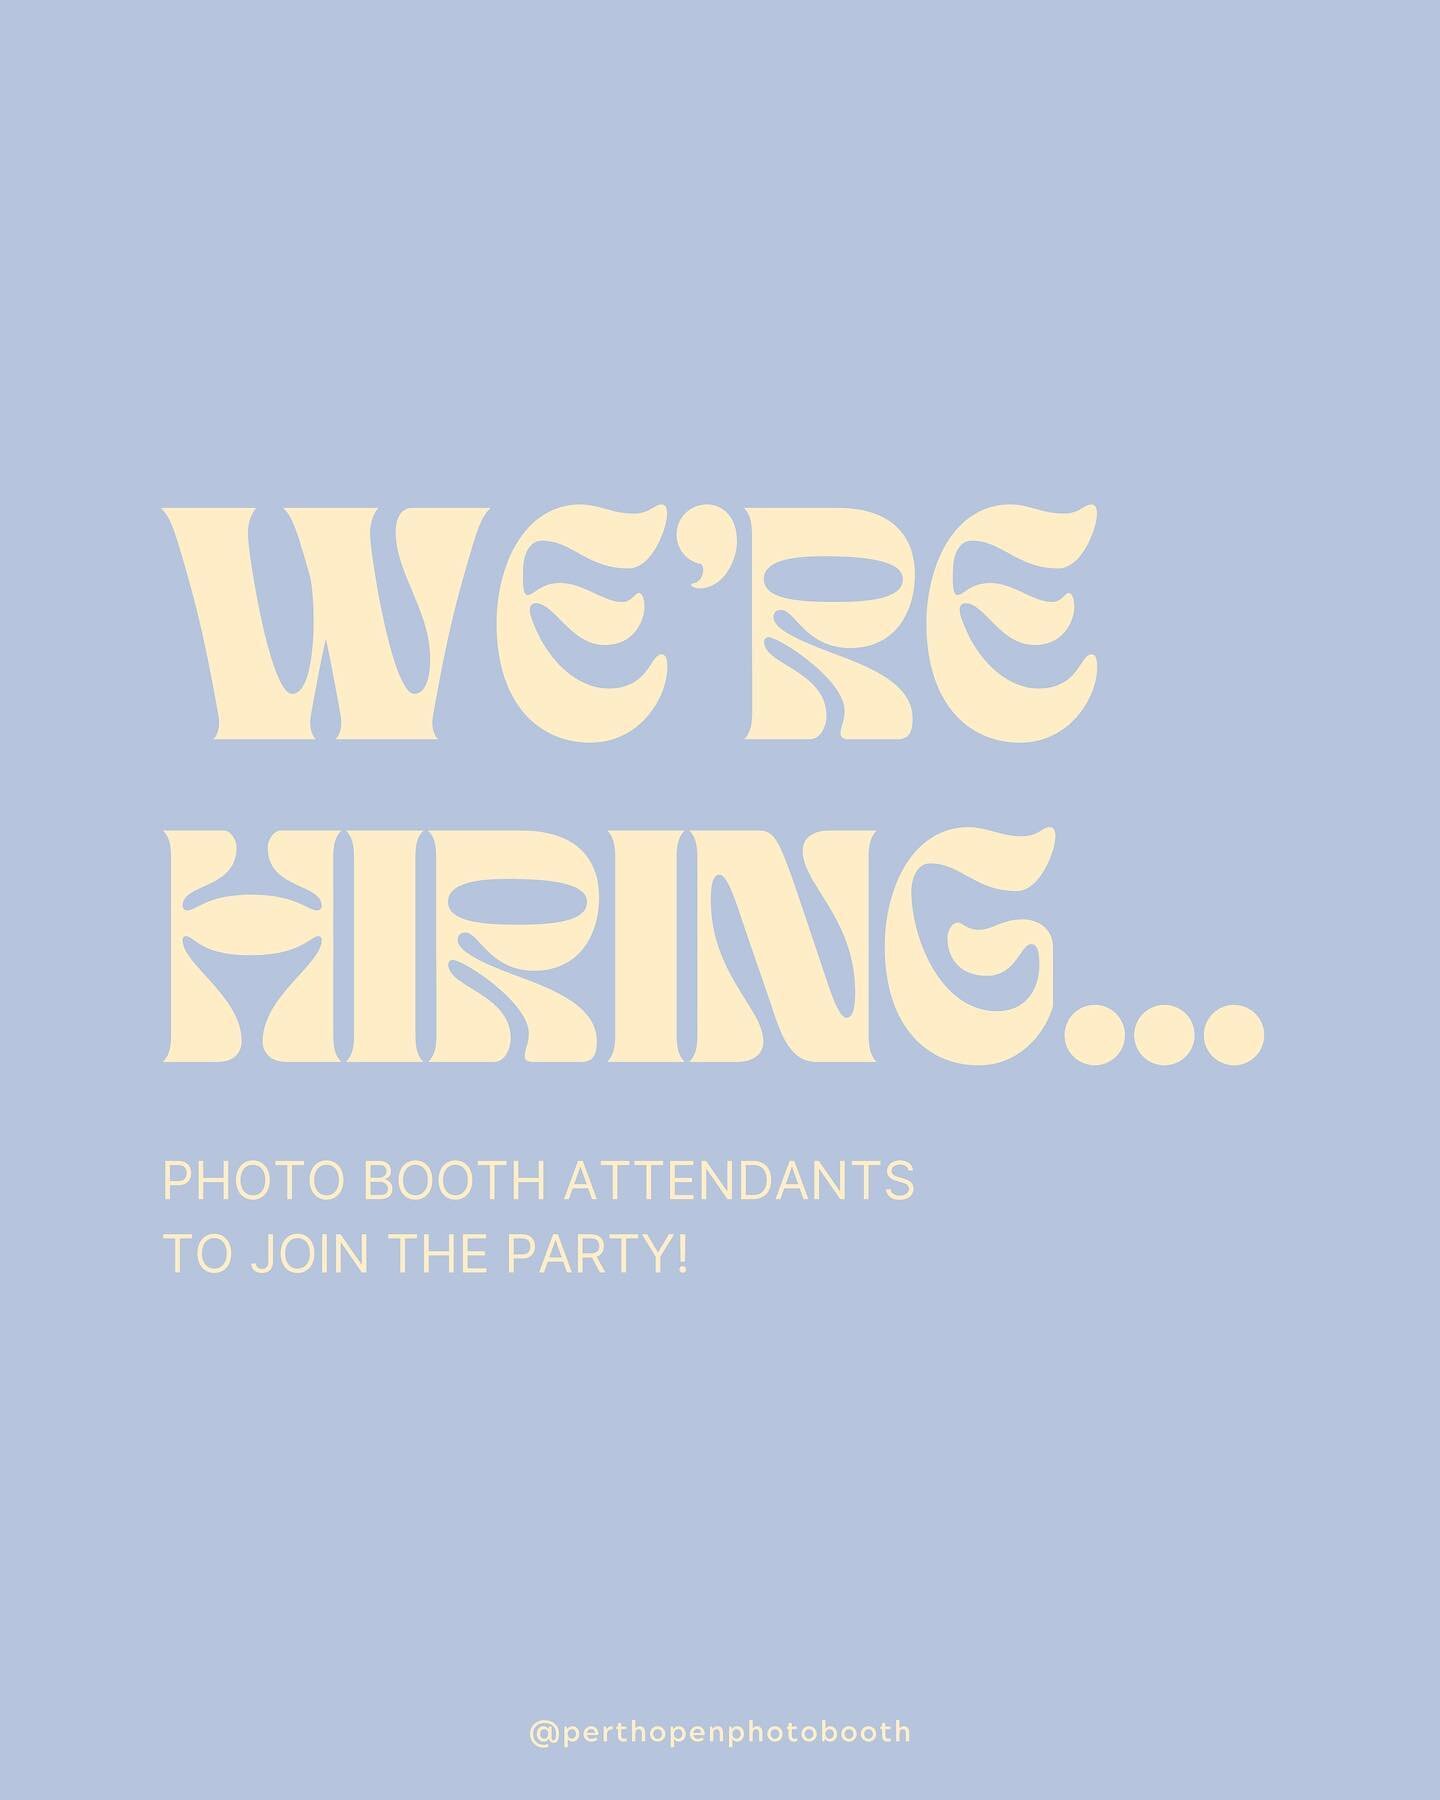 Calling out all job hunting party people! 🎶

We are looking for fun, friendly + energetic individuals to join our photo booth team! ✨ If you like weddings, parties, pictures, and making some $$ on the side, then this job is for you! 👀

You can beco